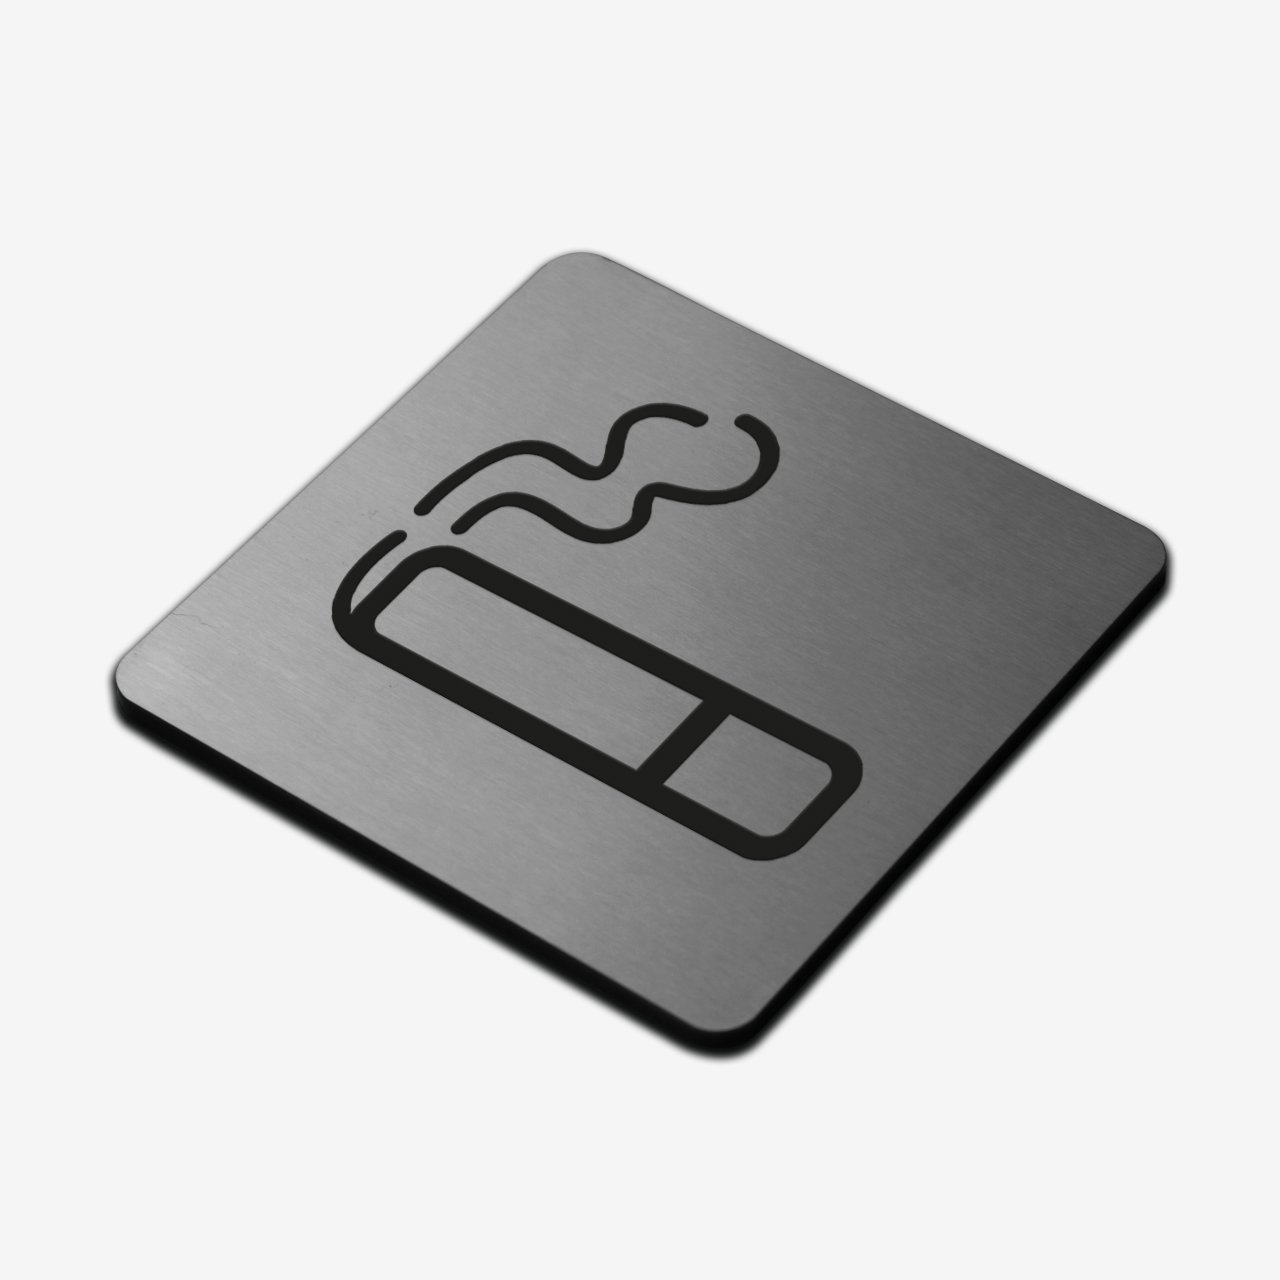  Smoke Zone - Stainless Steel Sign Information signs square Bsign